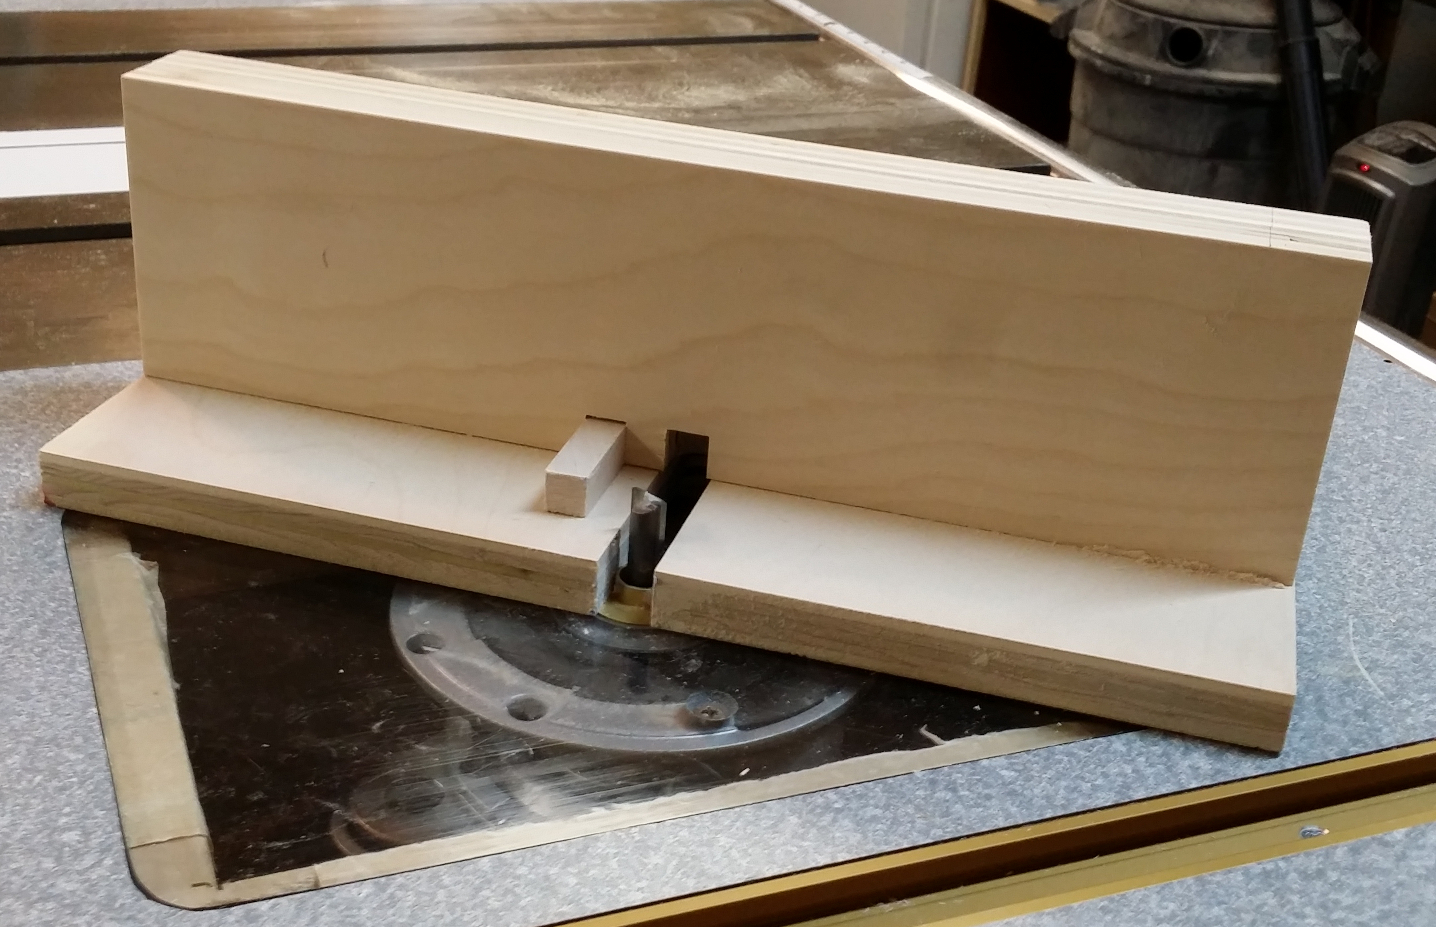 Shop-made Box Joint Jig | Diary of a Wood Nerd